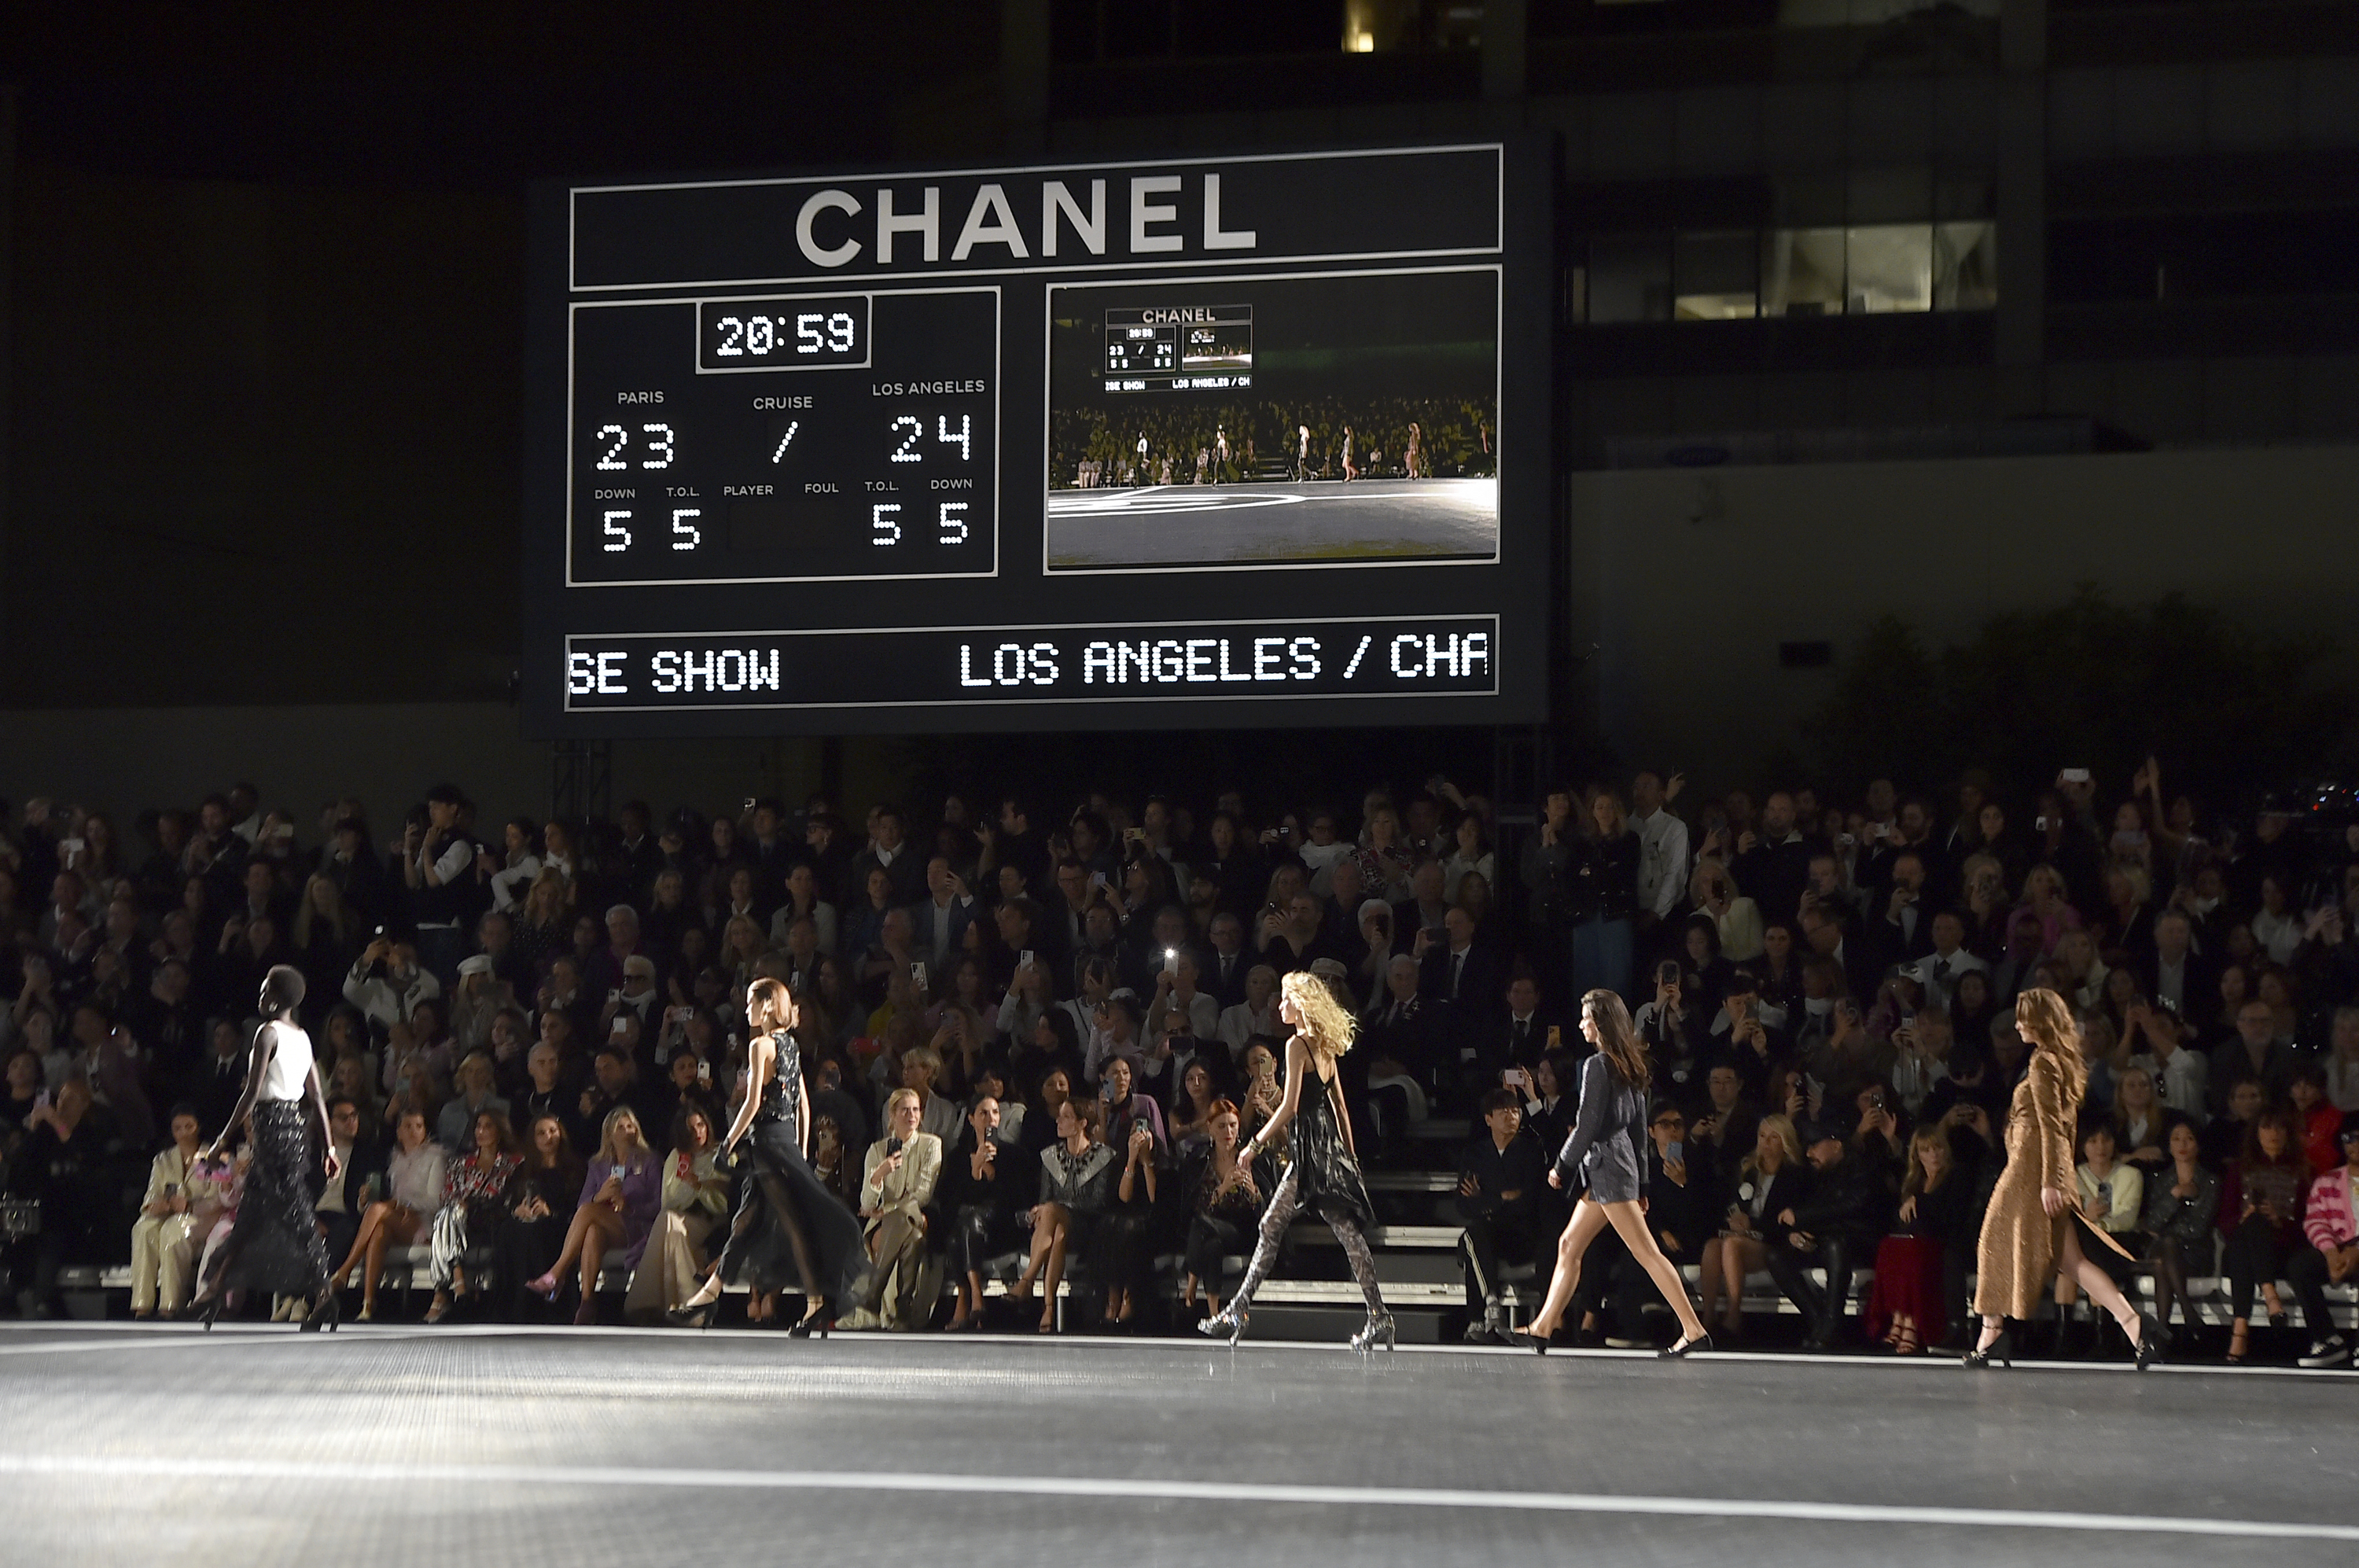 Chanel's Cruise Collection Show Was Full of Great Celebrity Outfits